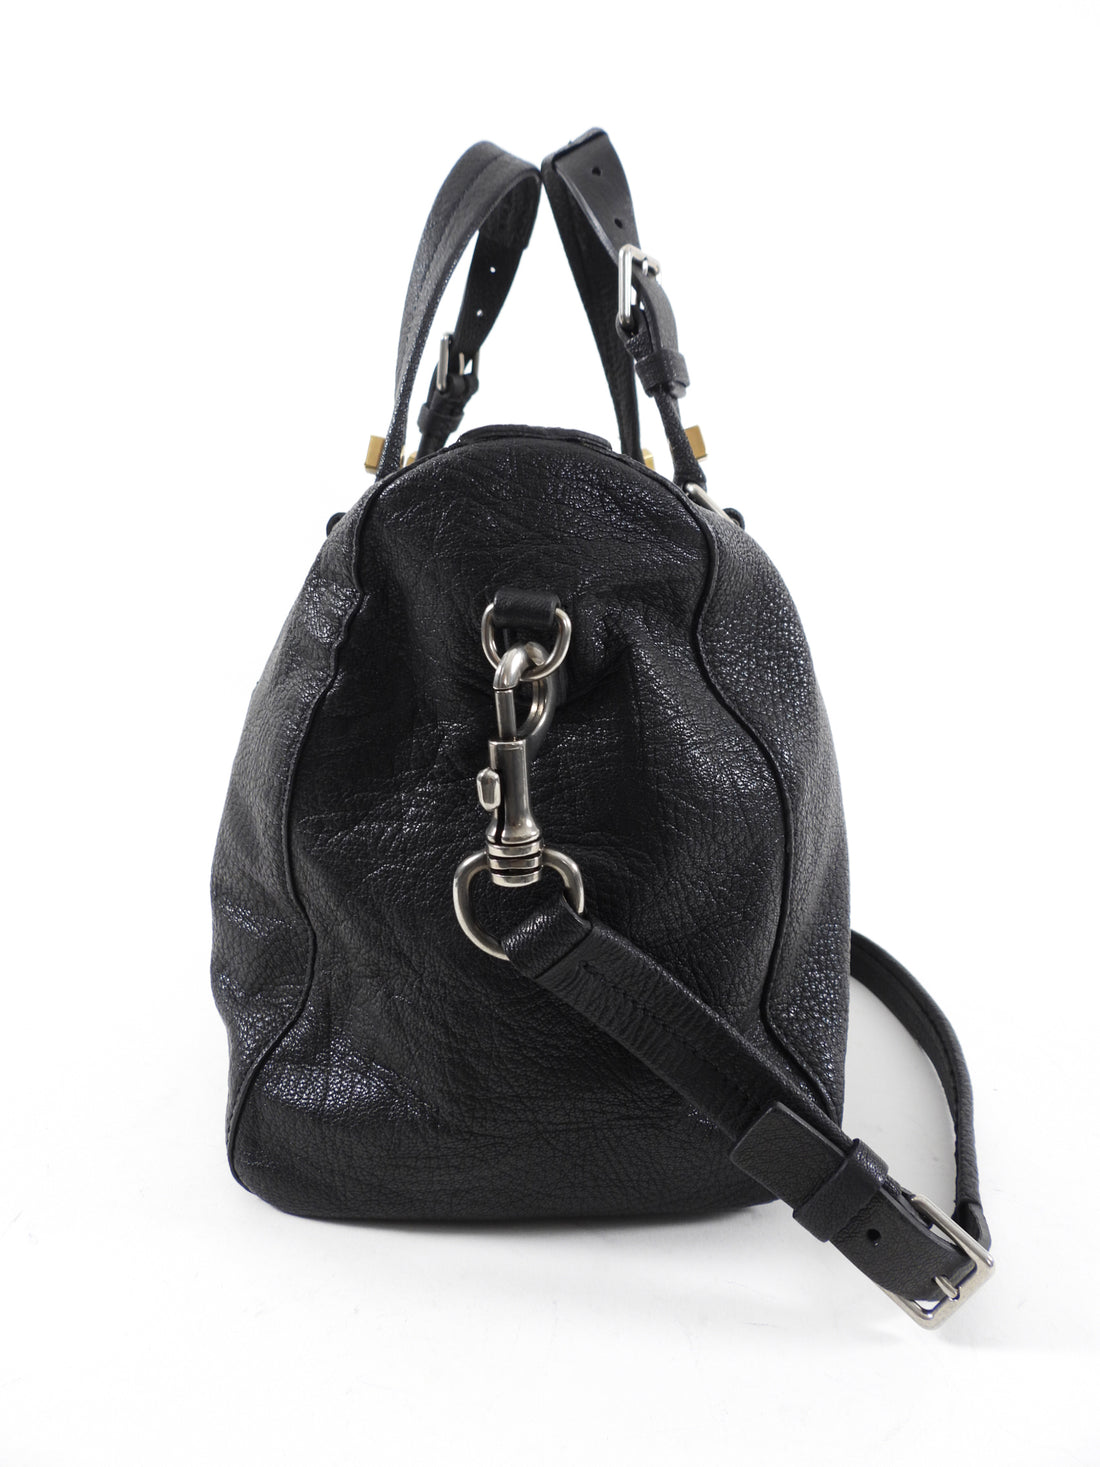 Celine Grained Black Leather Two-Way Bag